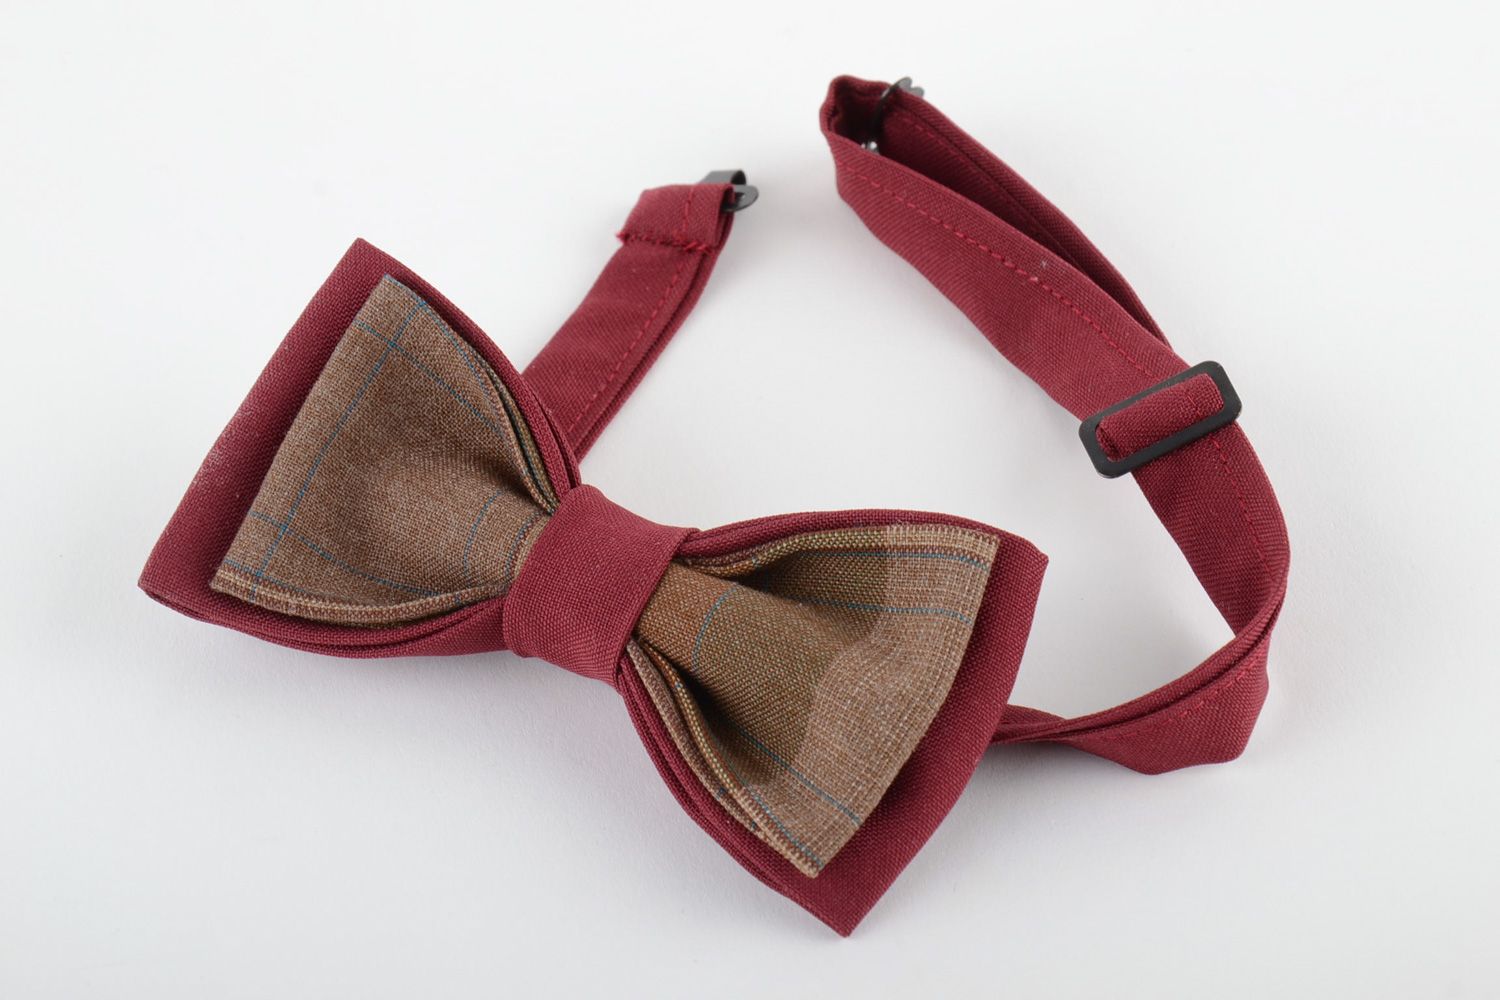 Handmade stylish bow tie sewn of costume fabric of dark red and brown colors photo 2